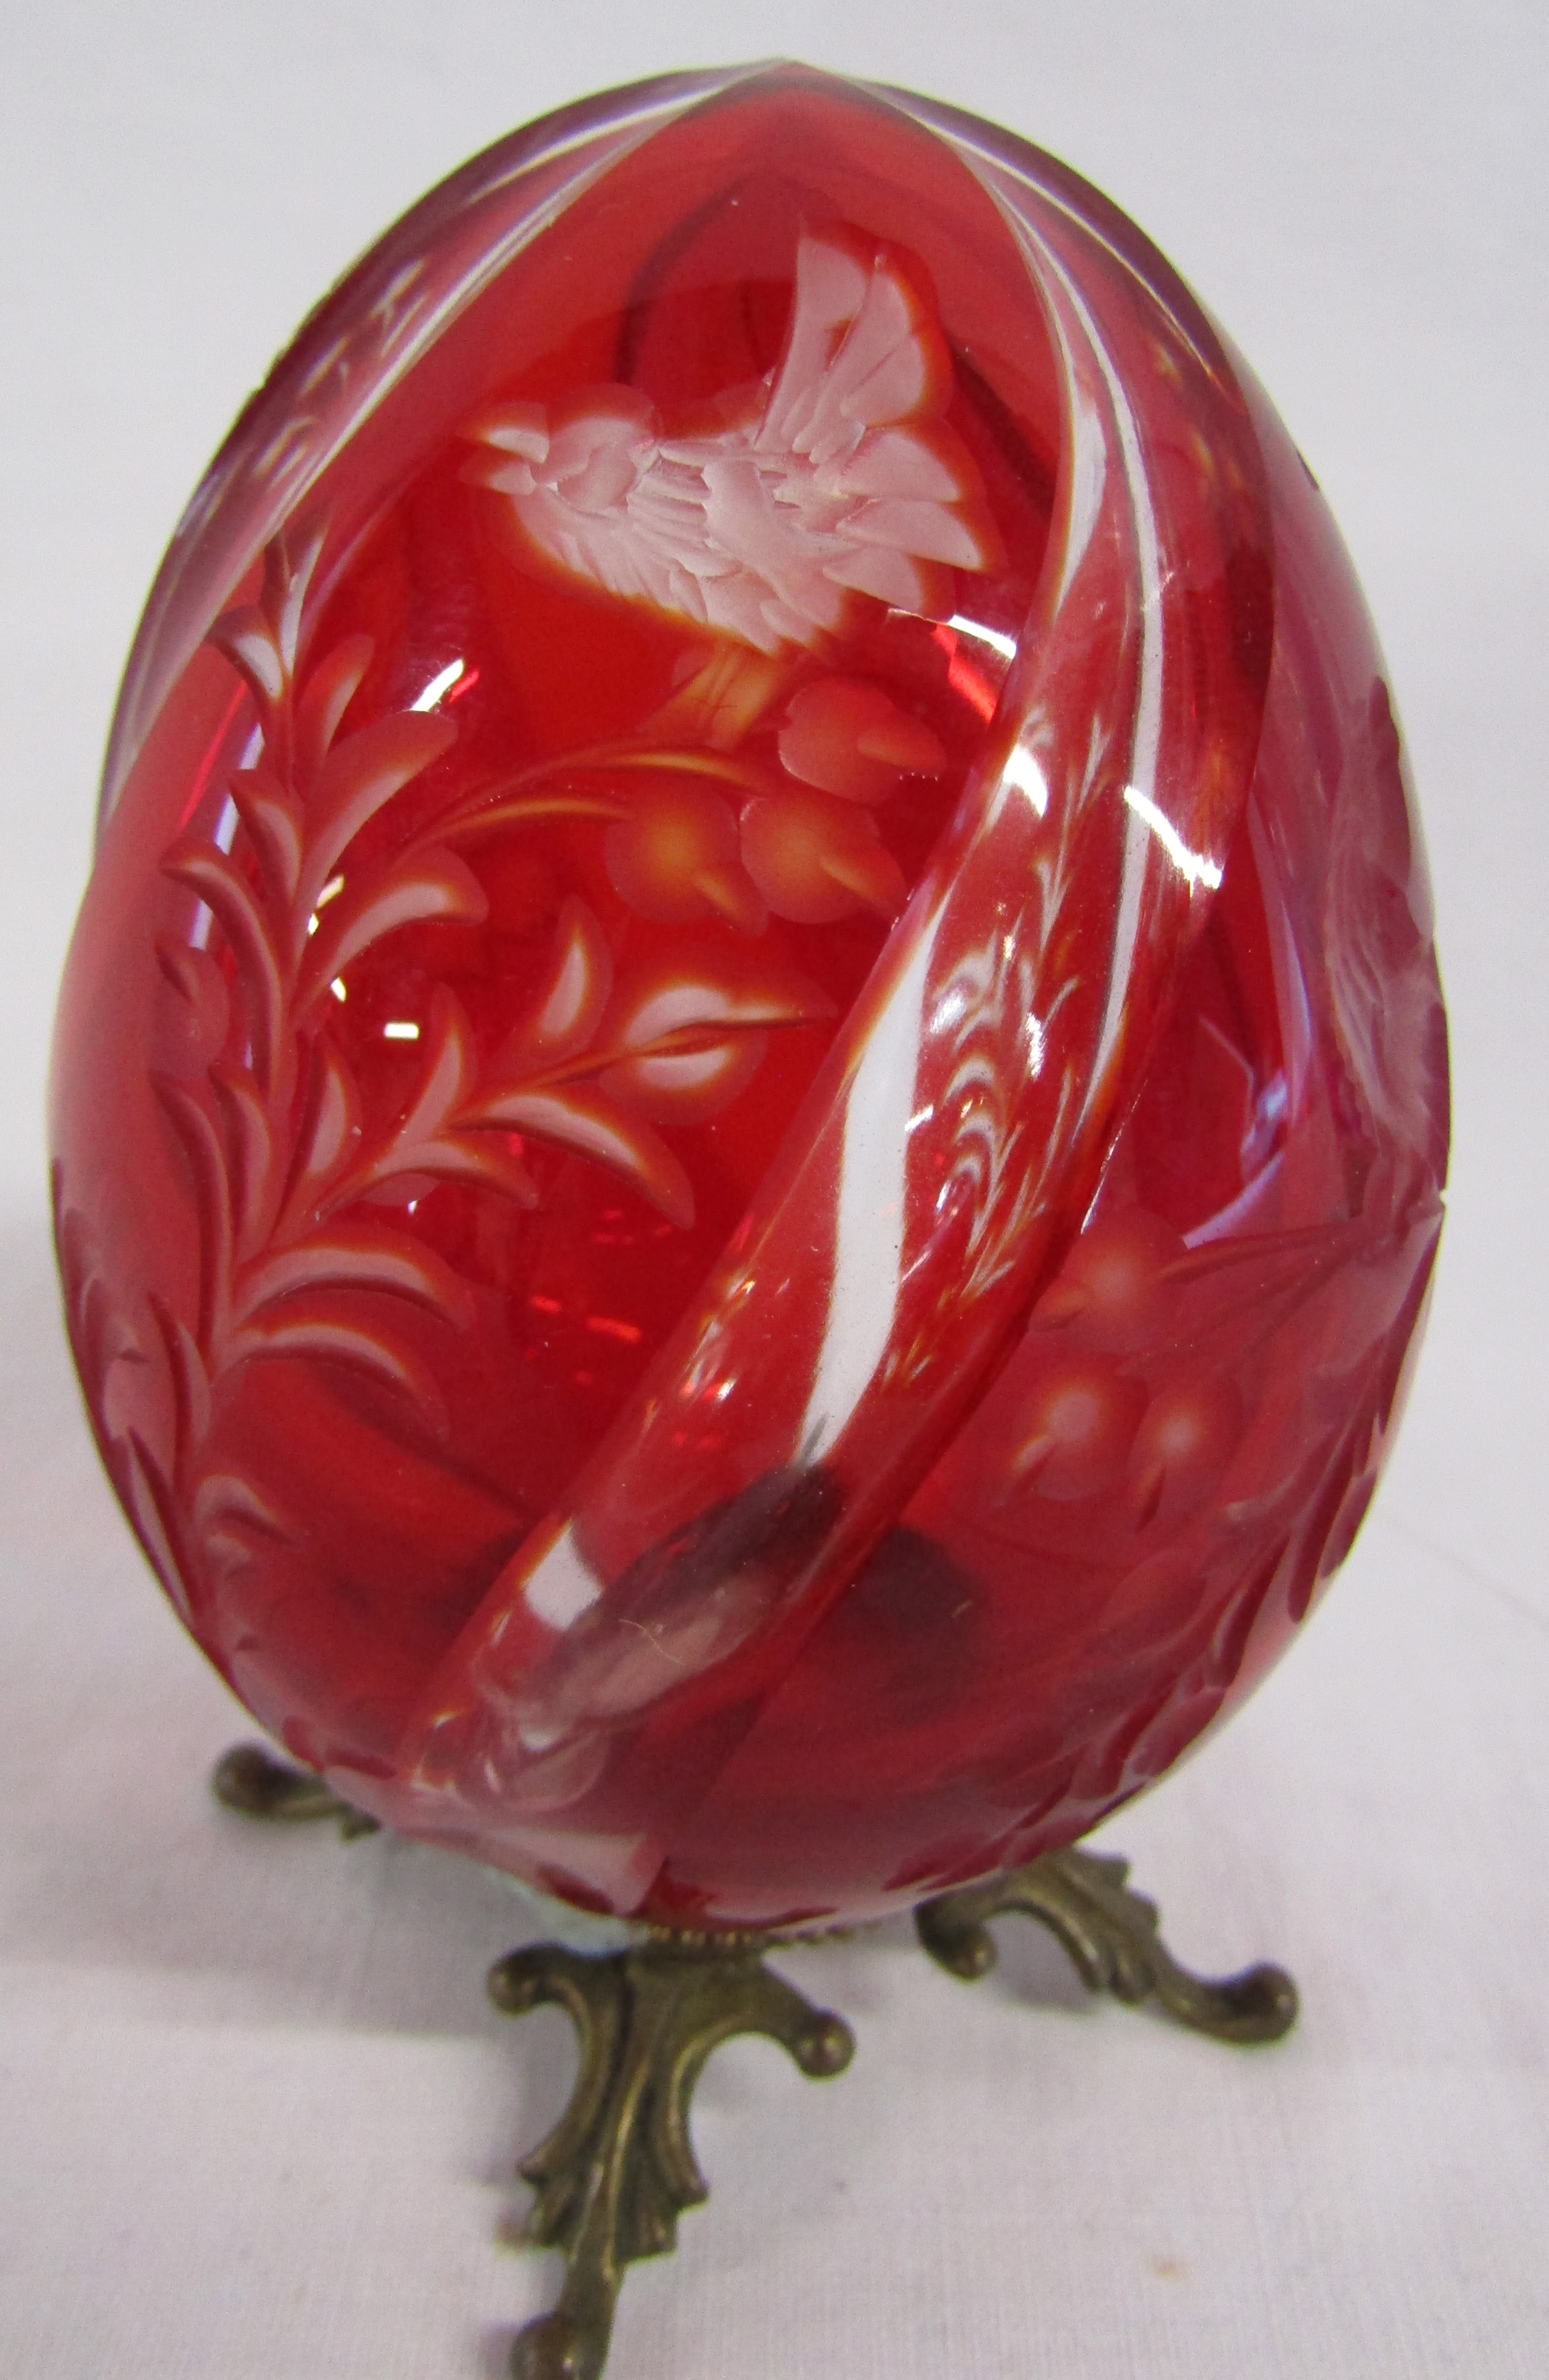 Caithness crystal vase with etched dolphins approx. 20.5cm and red glass egg with birds singing - Image 3 of 3